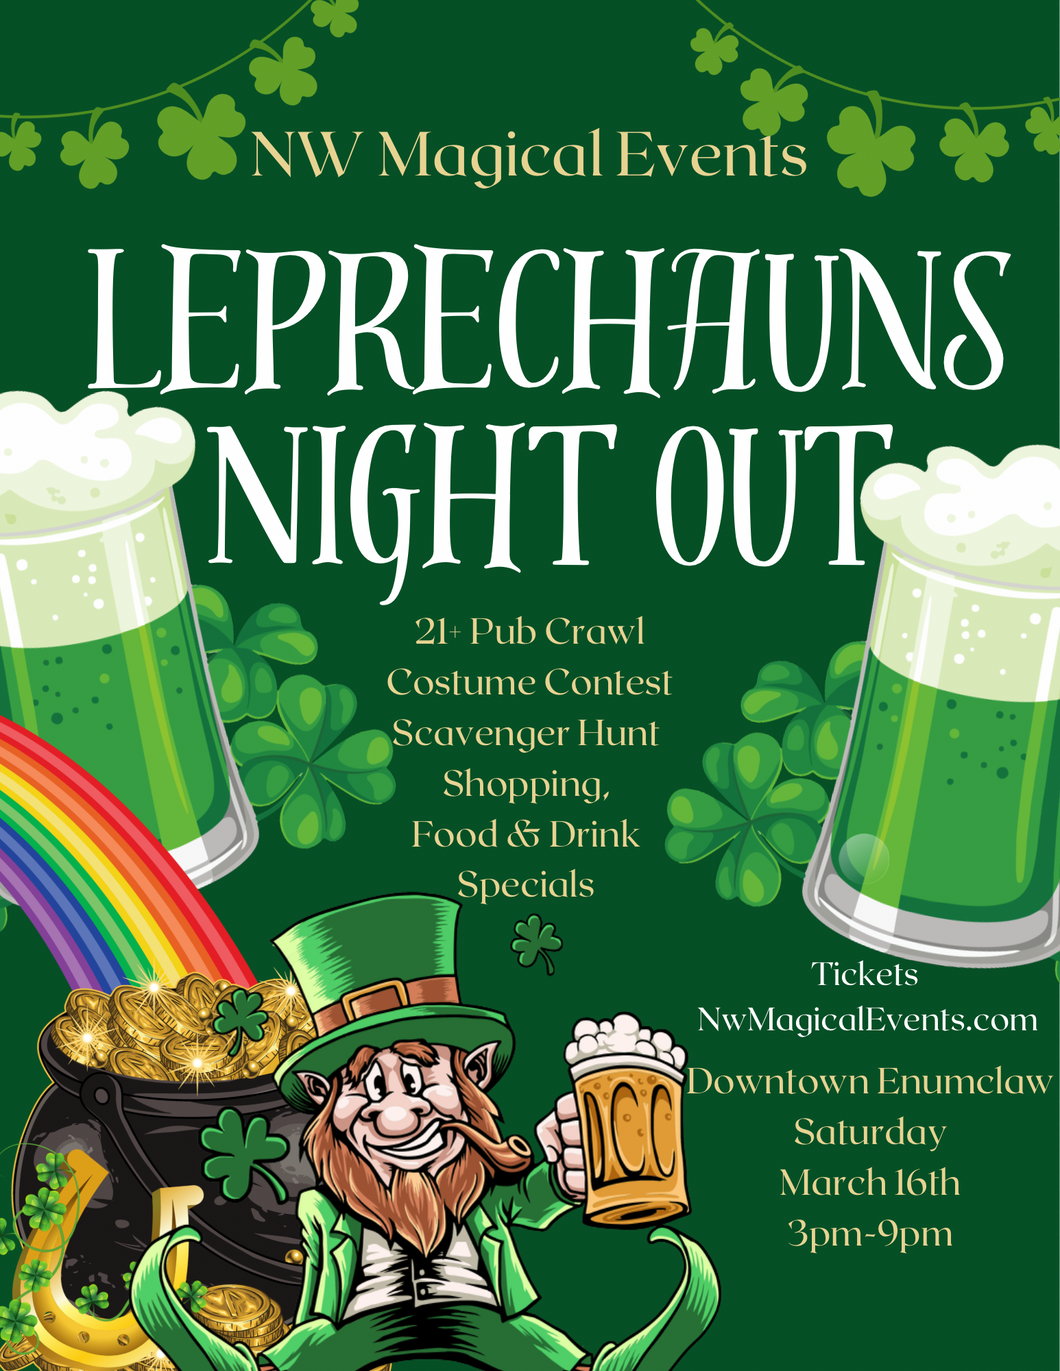 Leprechauns Night Out Ticket